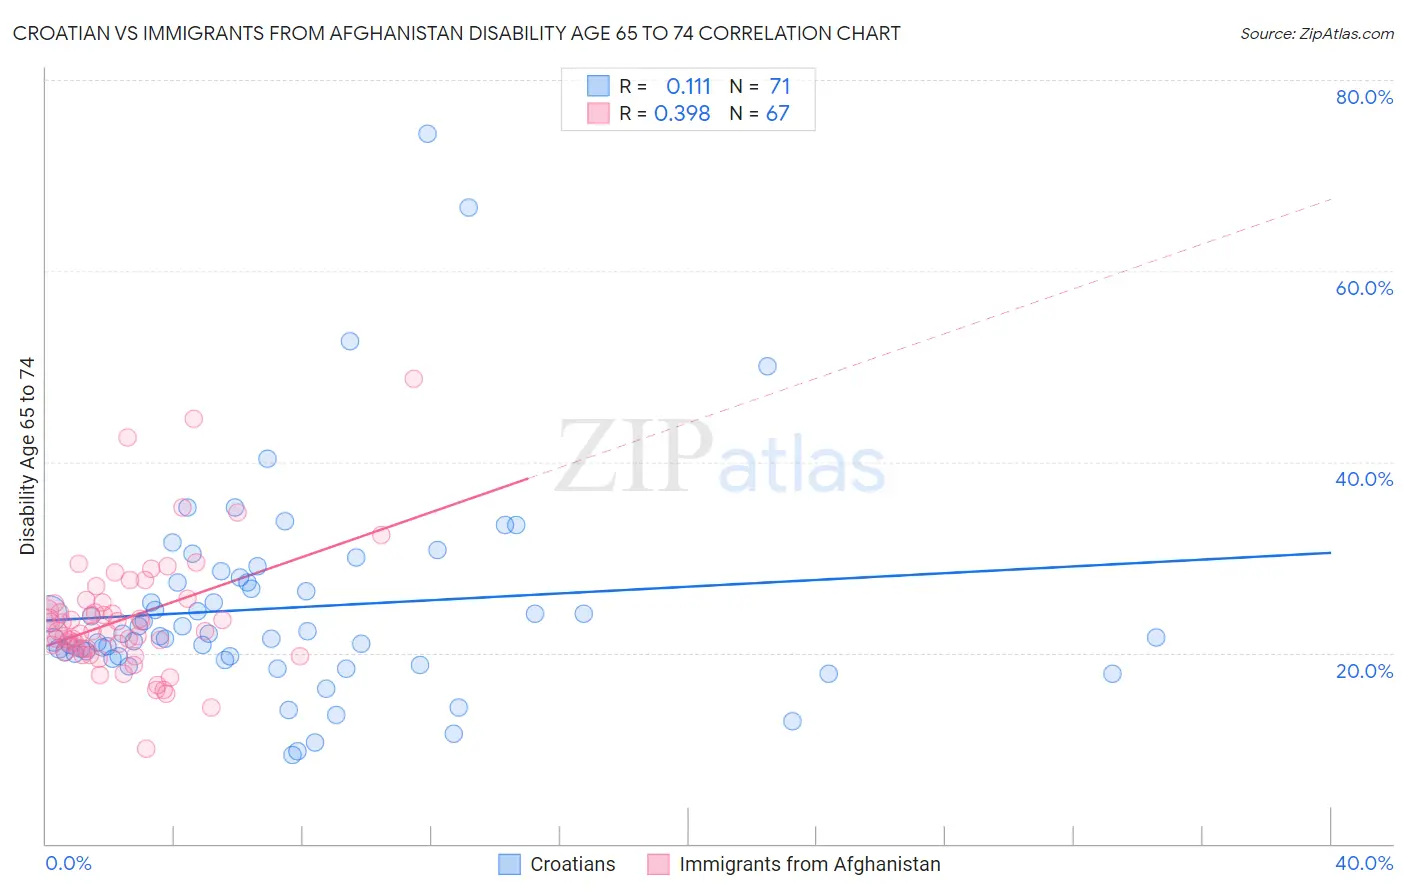 Croatian vs Immigrants from Afghanistan Disability Age 65 to 74